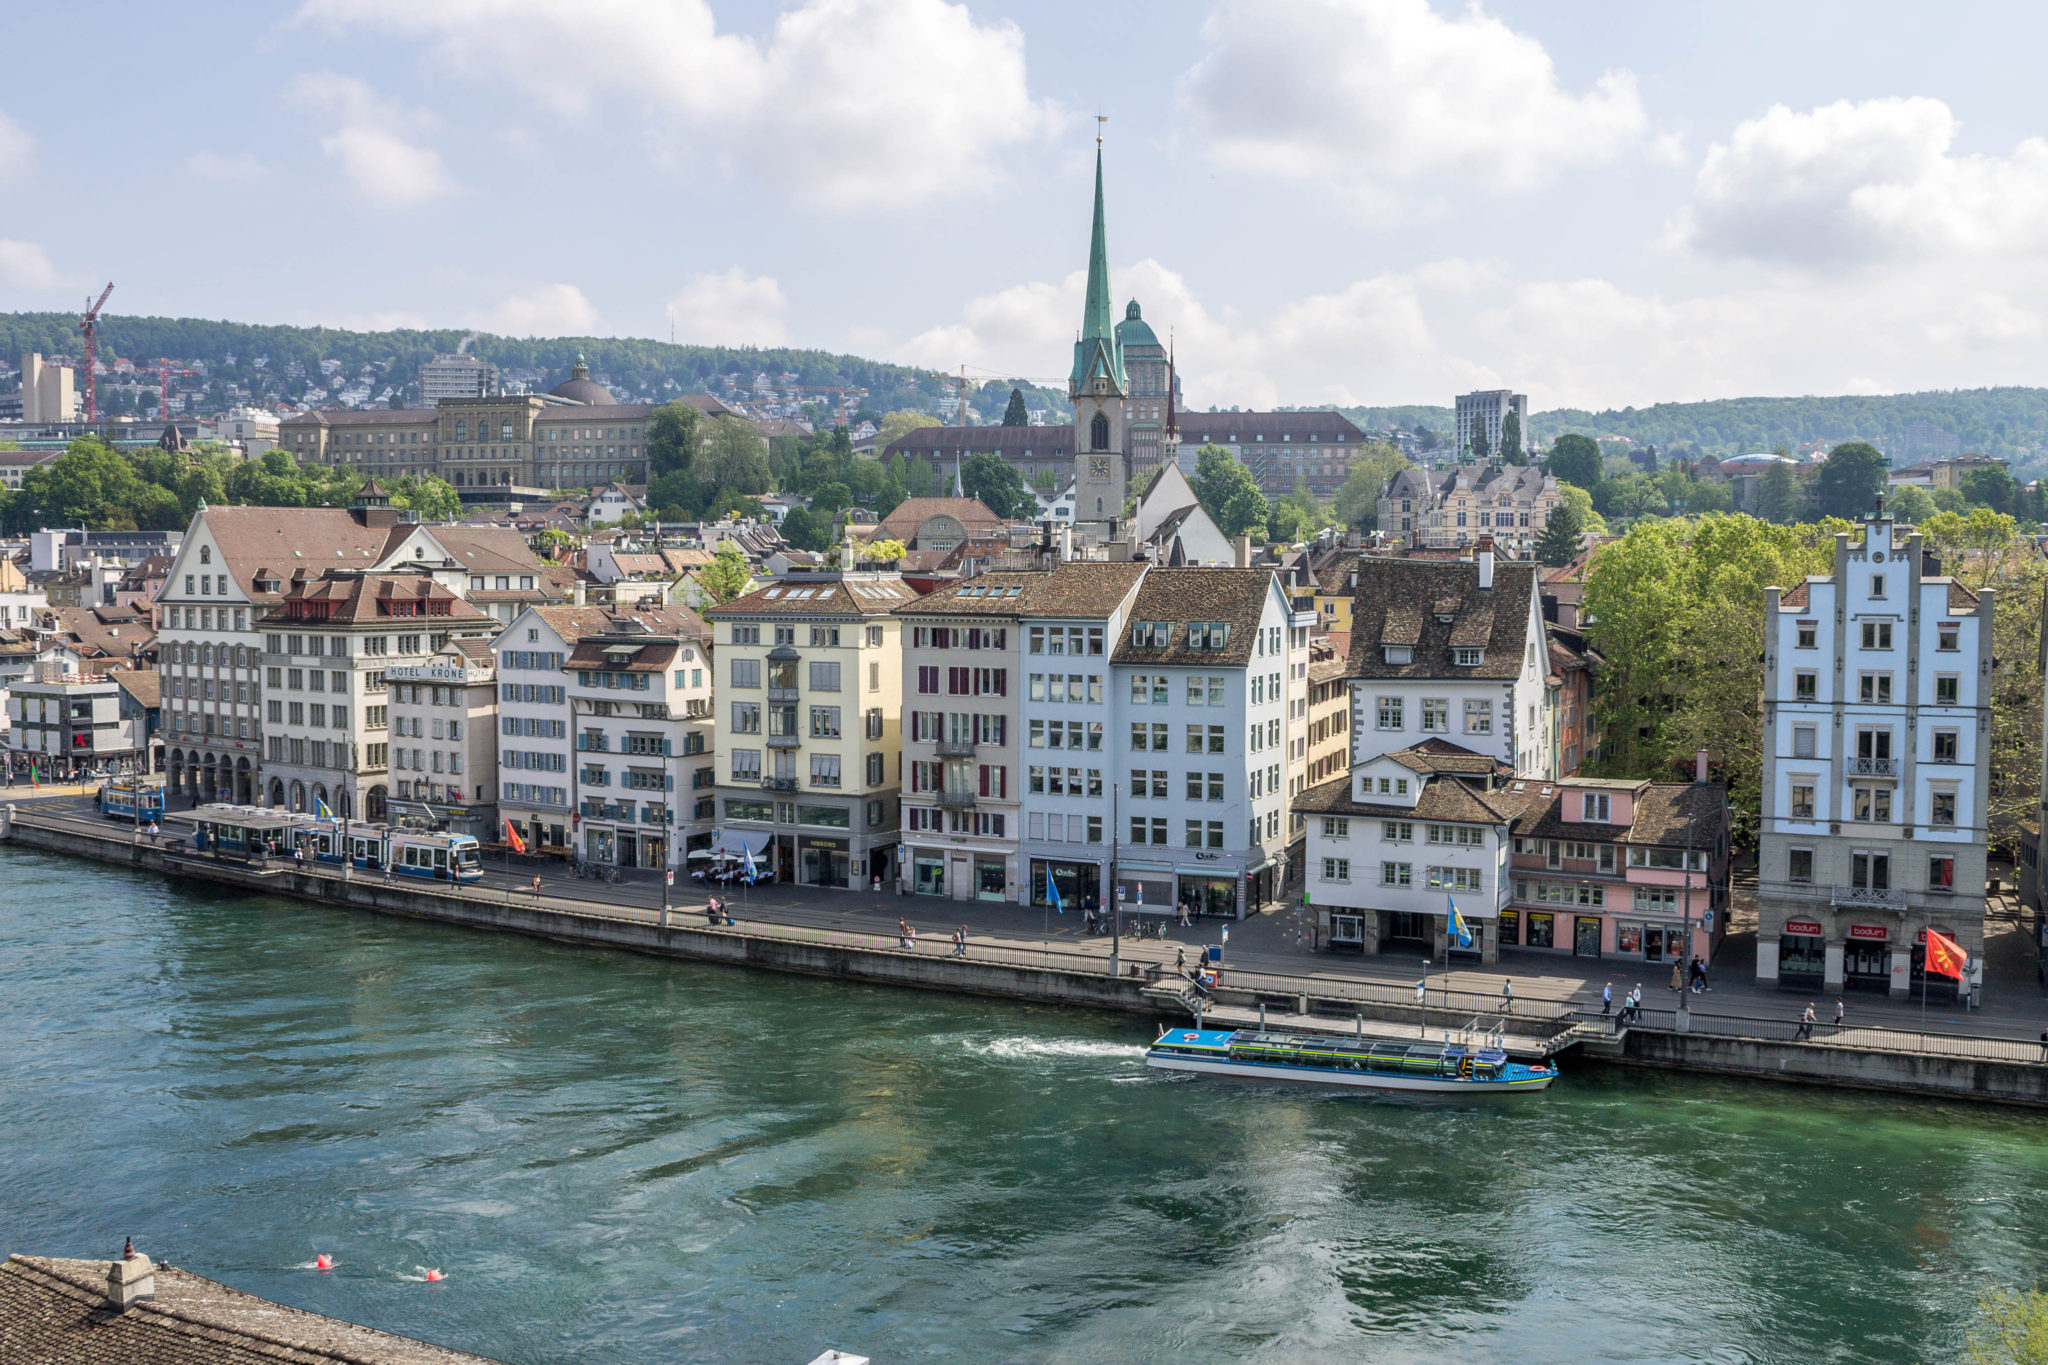 The buildings on the shore of the river in Zurich.